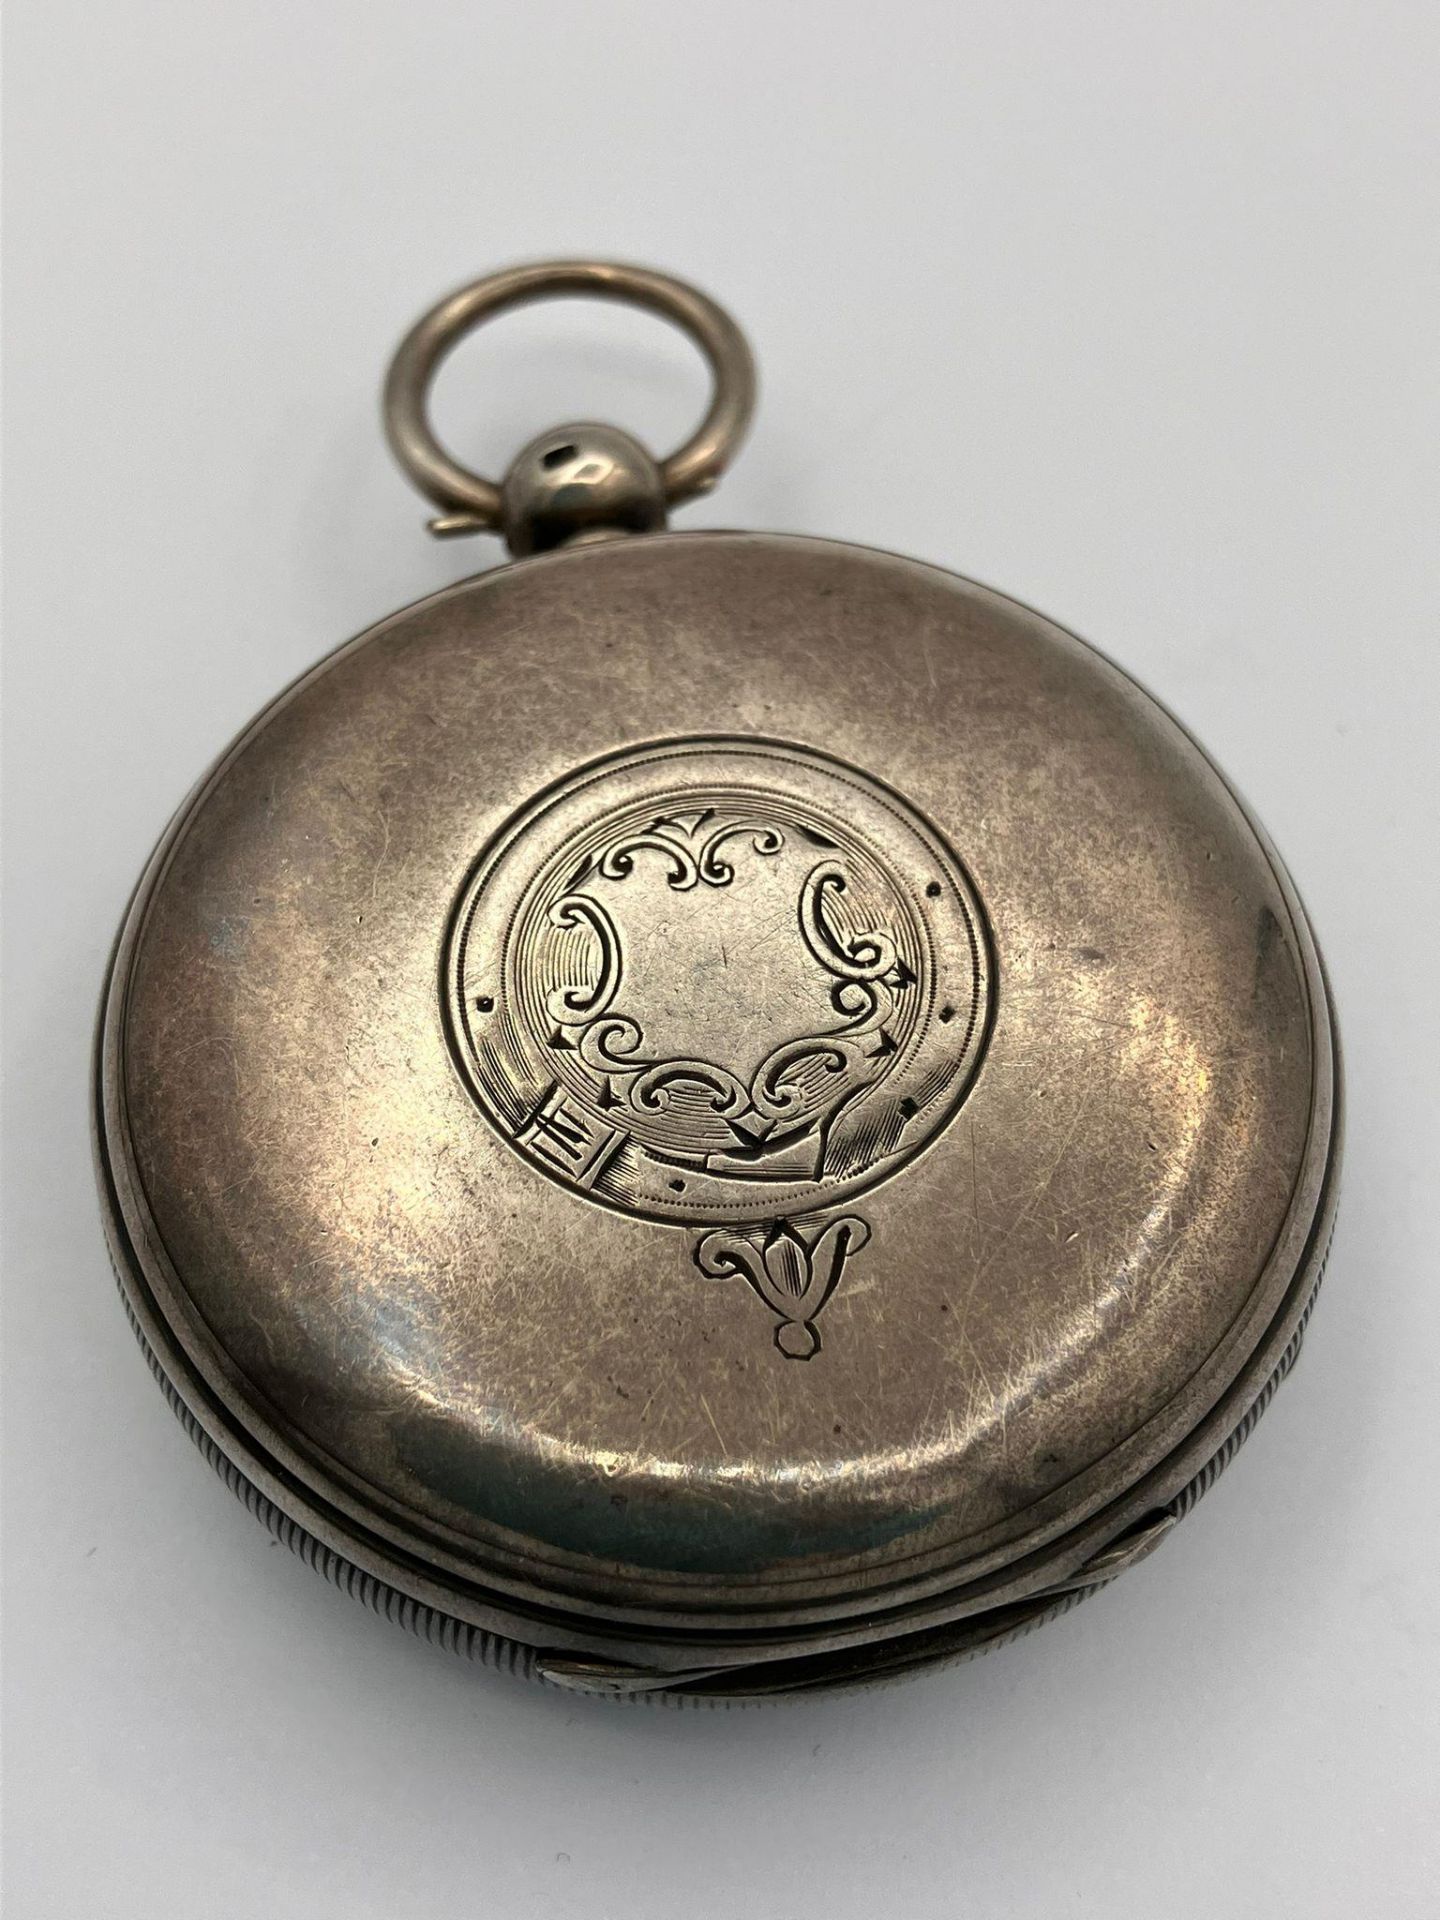 Antique SILVER POCKET WATCH with clear Hallmark for Robert John Pike, London 1873. Watch is - Image 2 of 3